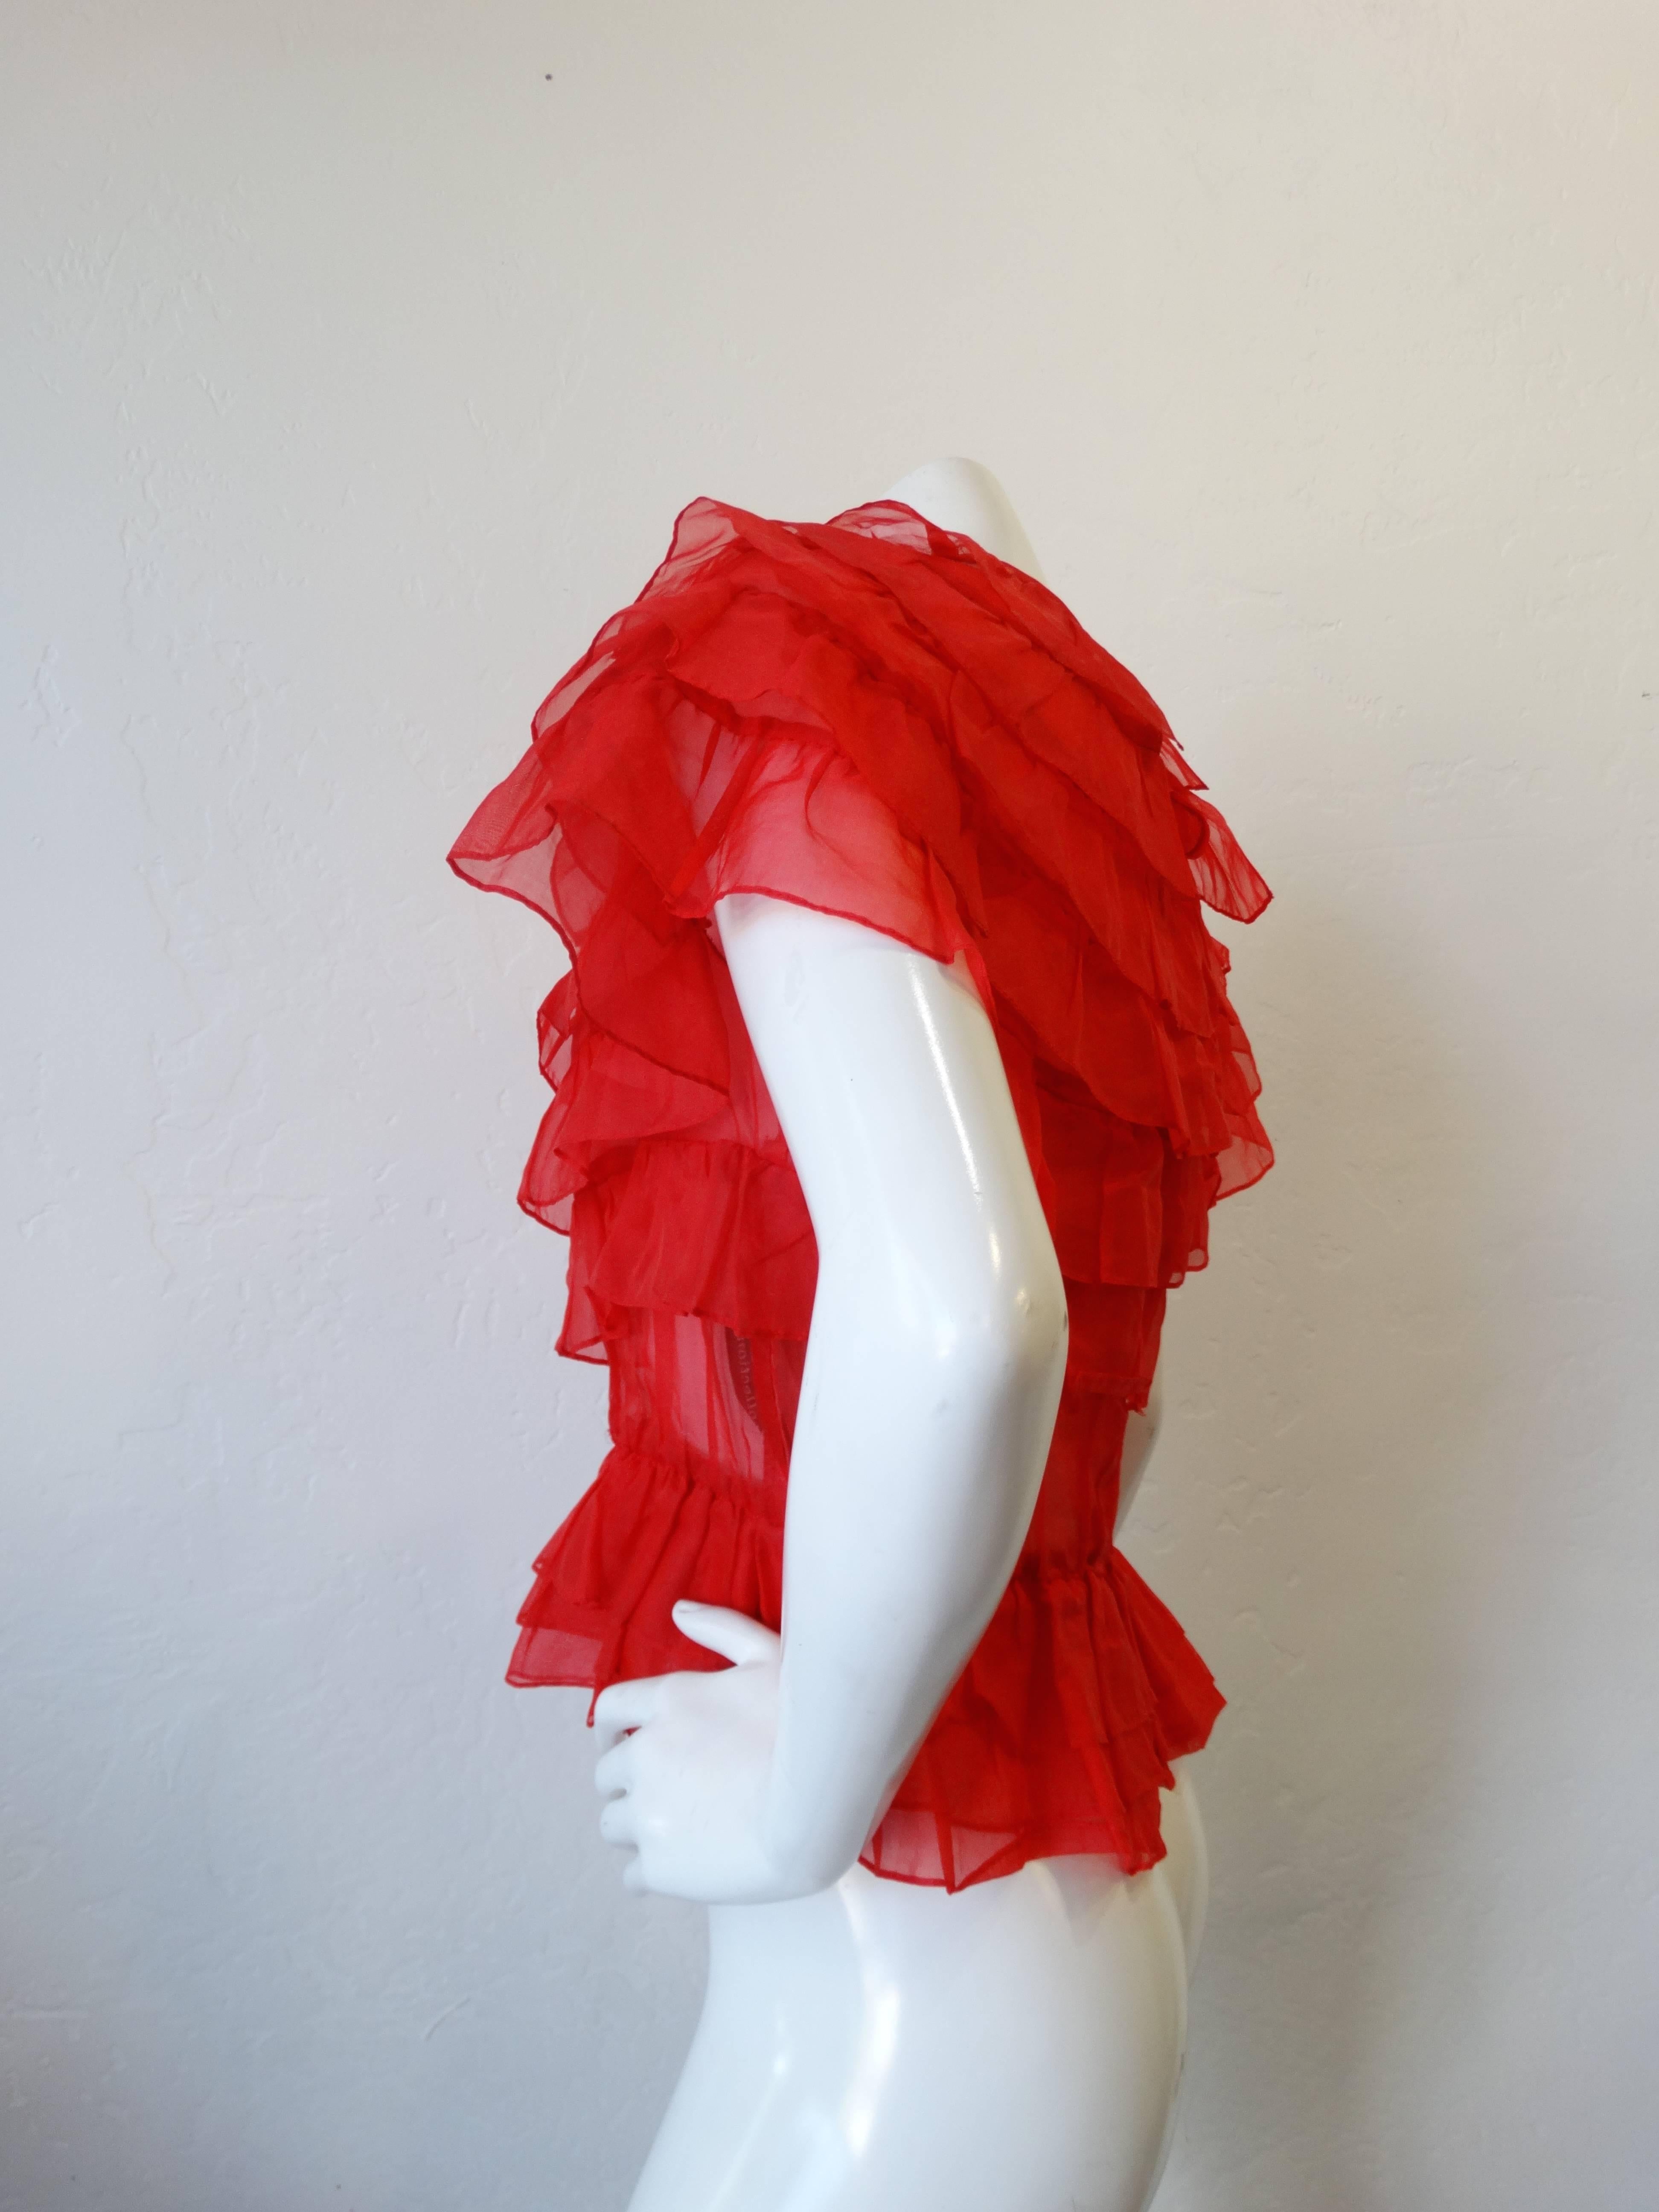 FABULOUS vintage ruffled blouse, from Joy Stevens Collection! Fabric is sheer lipstick red. Style features layers of ruffles, ruffles cap over shoulder, vintage button keyhole at back of neck, elastic waist-elastic does not have much stretch.